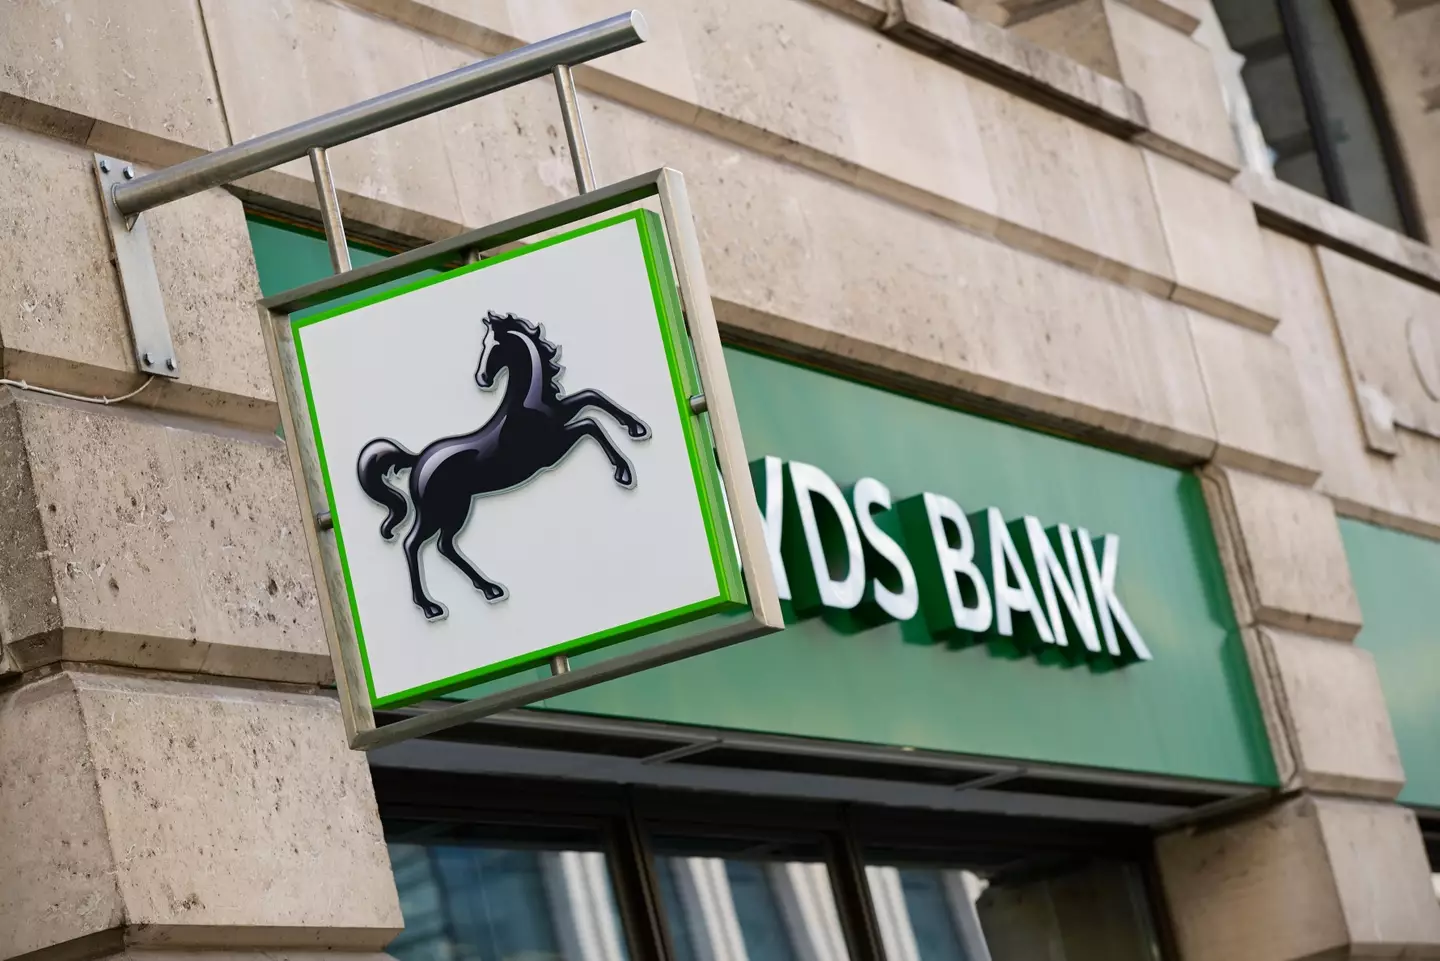 Lloyds Bank has issued a warning about romance scams.